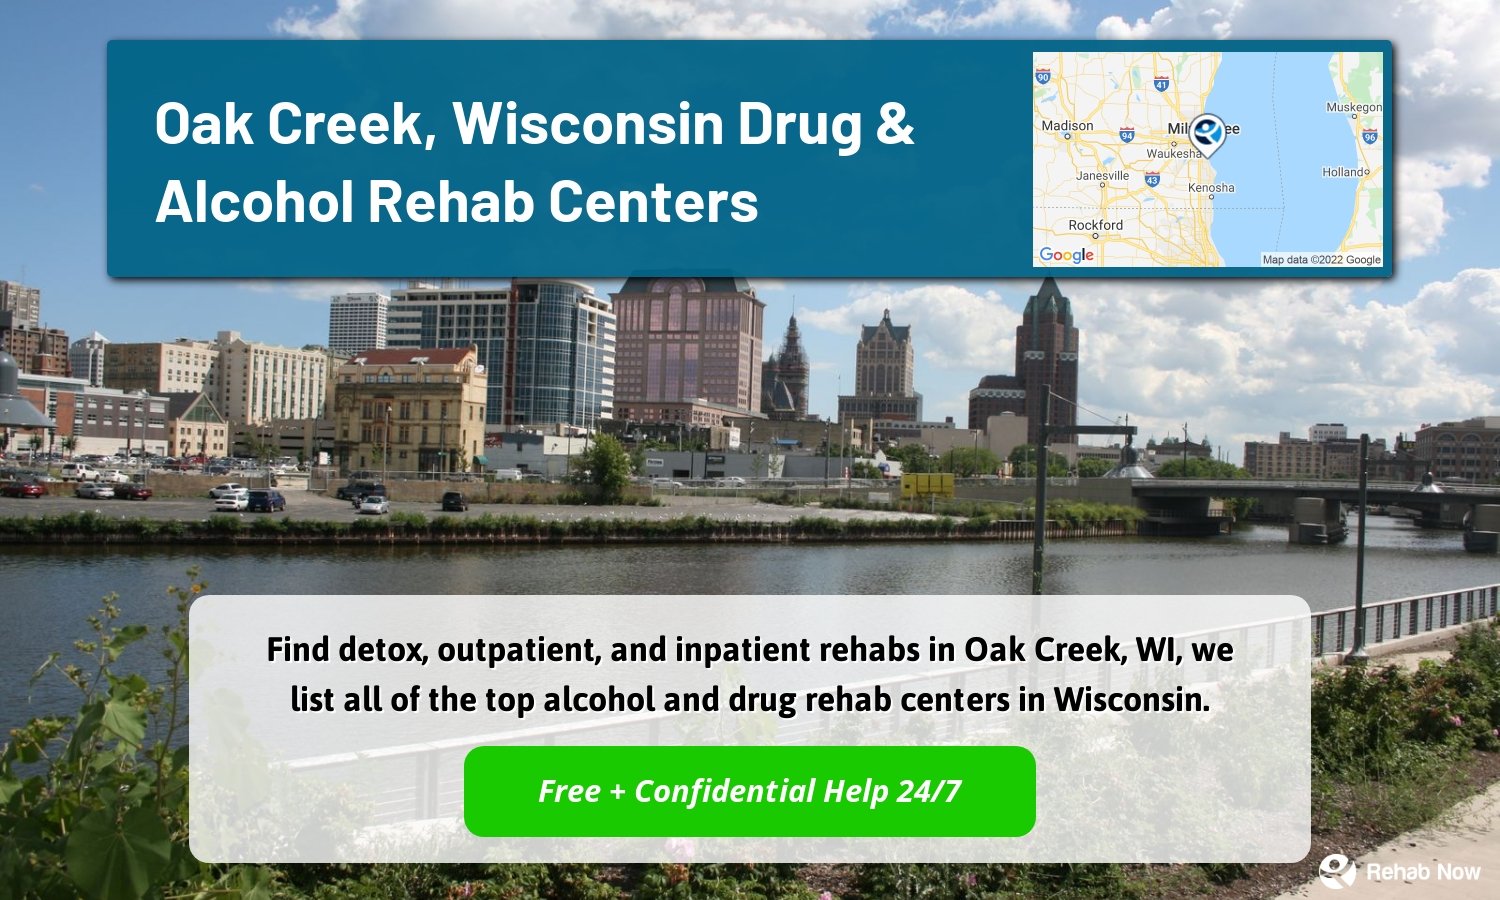 Find detox, outpatient, and inpatient rehabs in Oak Creek, WI, we list all of the top alcohol and drug rehab centers in Wisconsin.